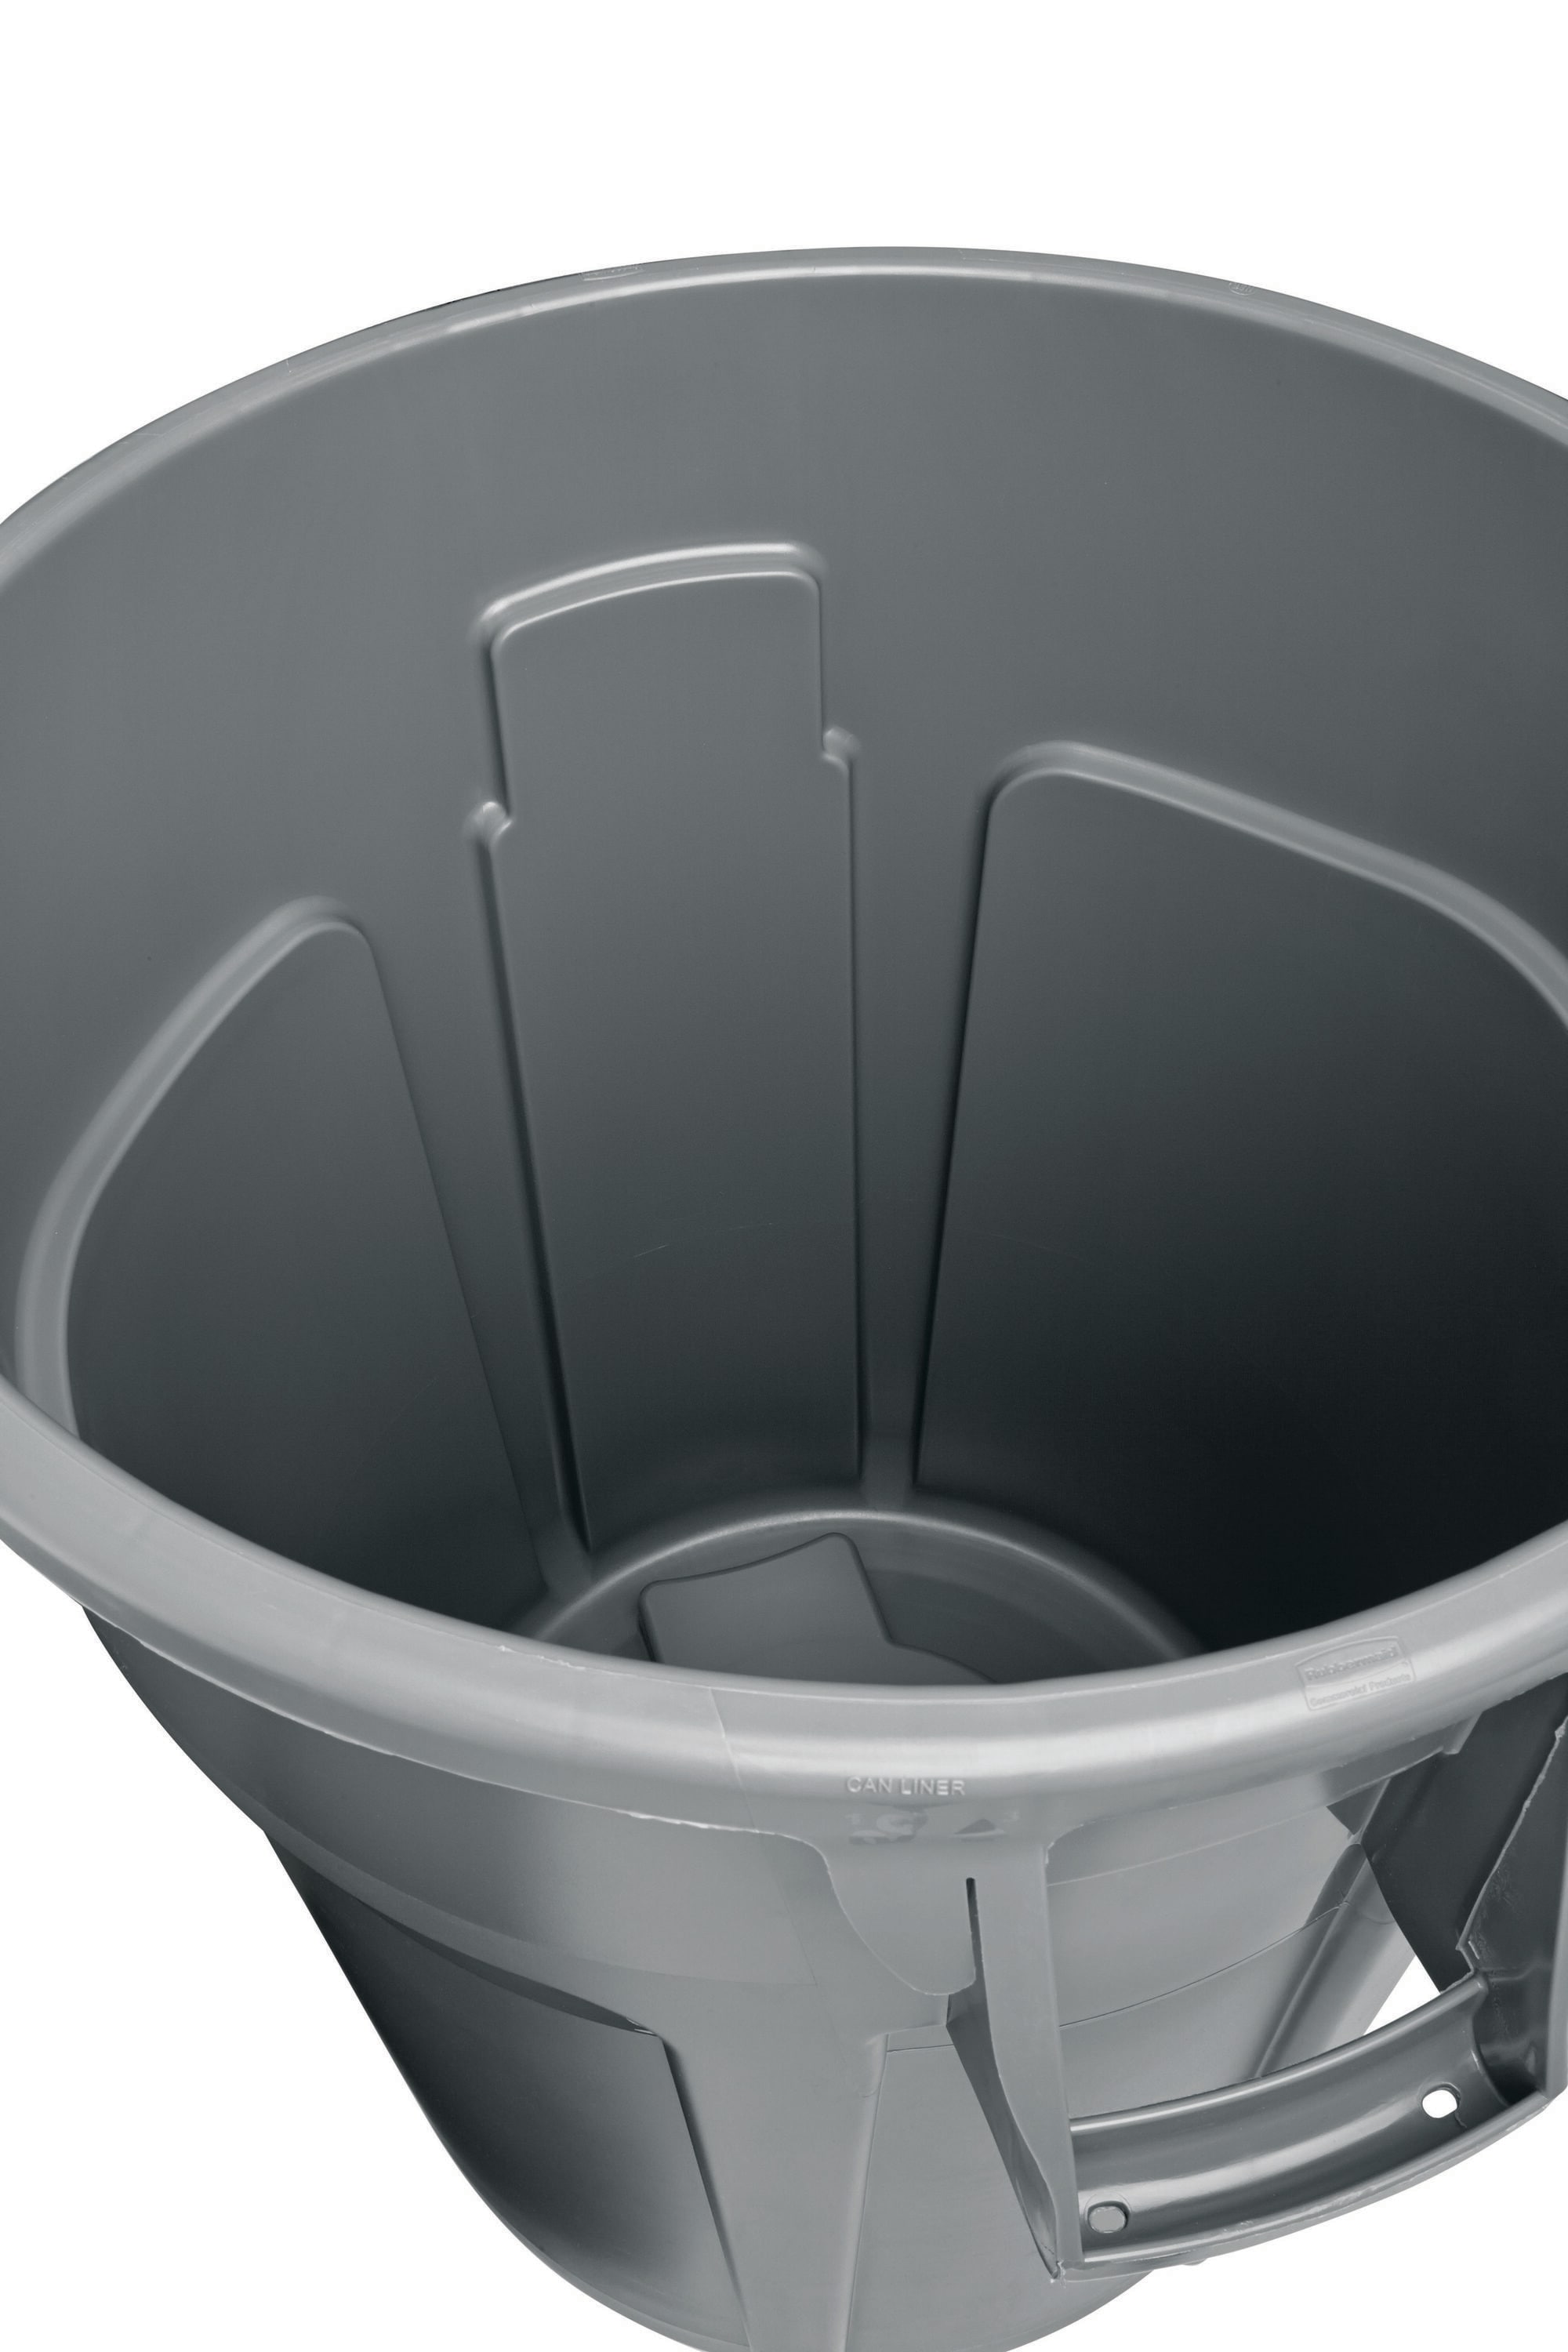 24 Gallon Plastic Extra Large Trash Can with Wheels WWXL24/WWXLD1-44